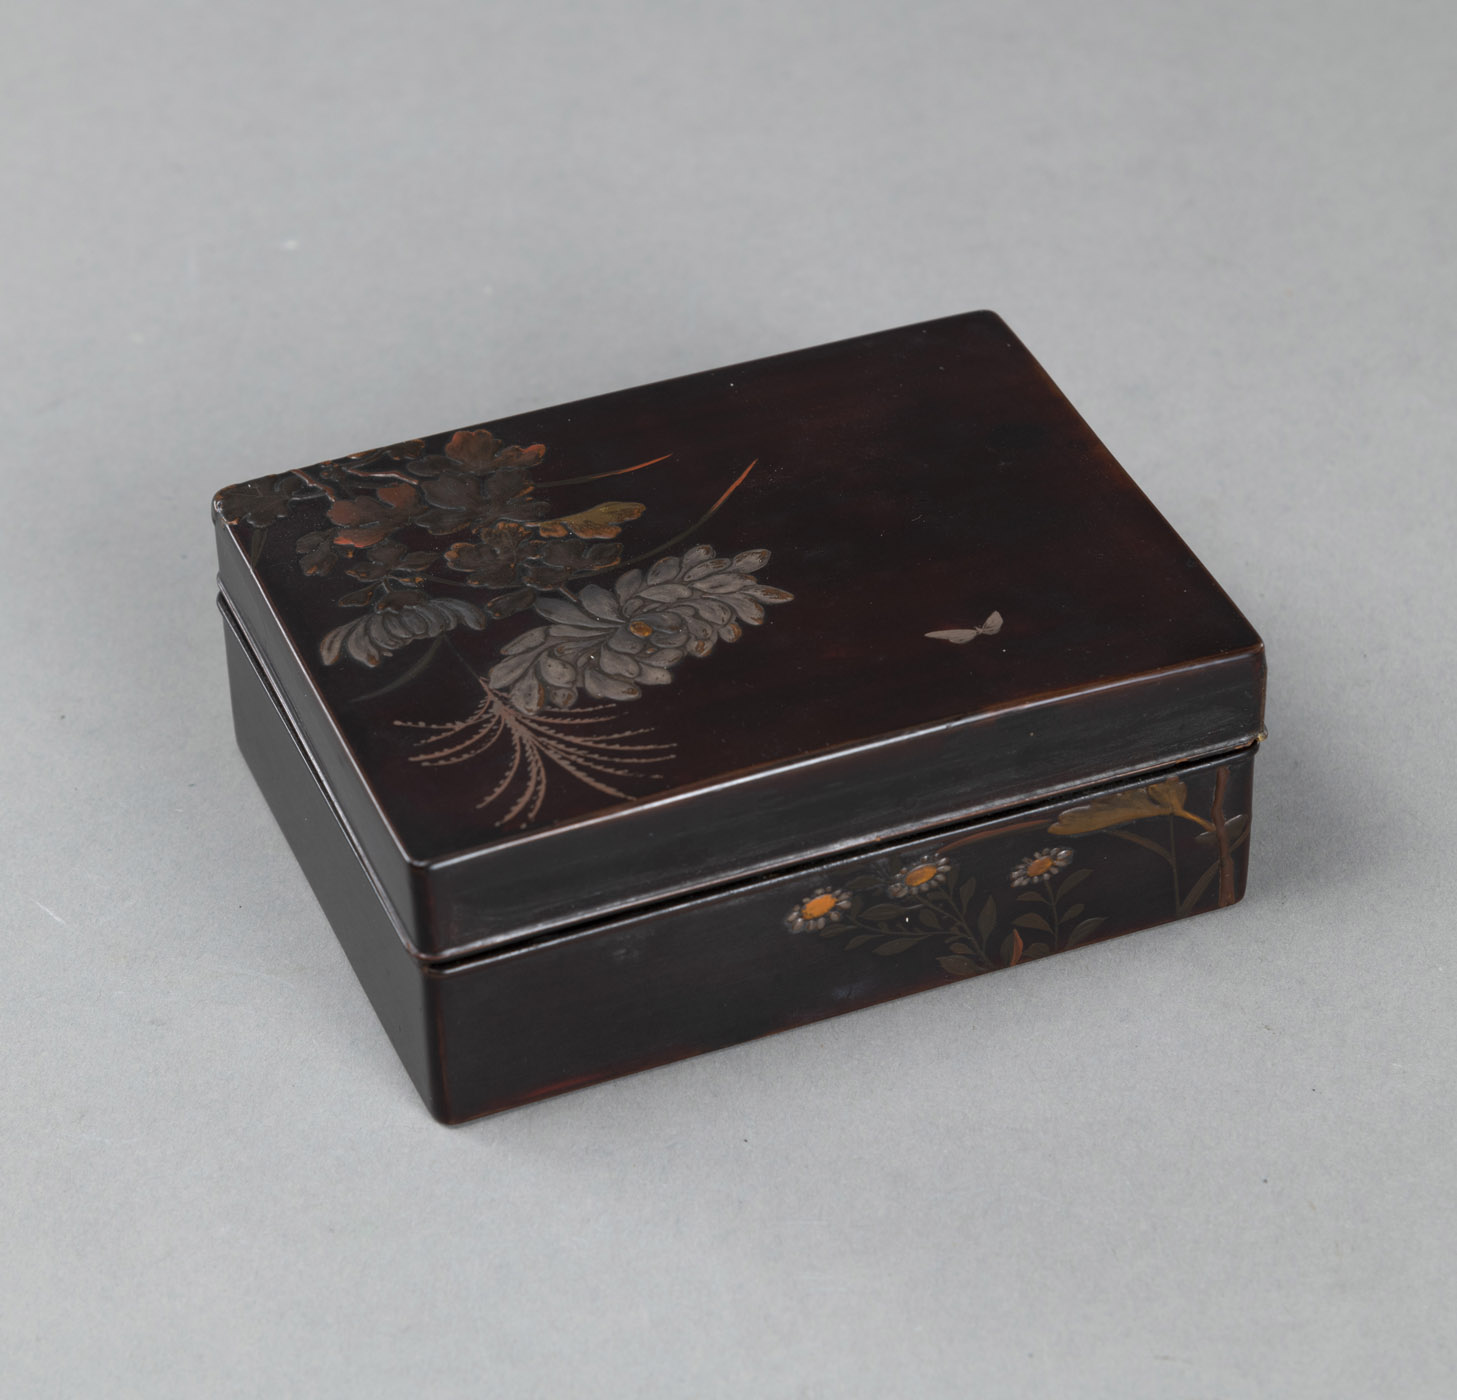 <b>A SMALL RECTANGULAR BOX AND COVER WITH POLYCHROME LACQUER DECORATION DEPICTING CHRYSANTHEMUMS AND A BUTTERFLY</b>